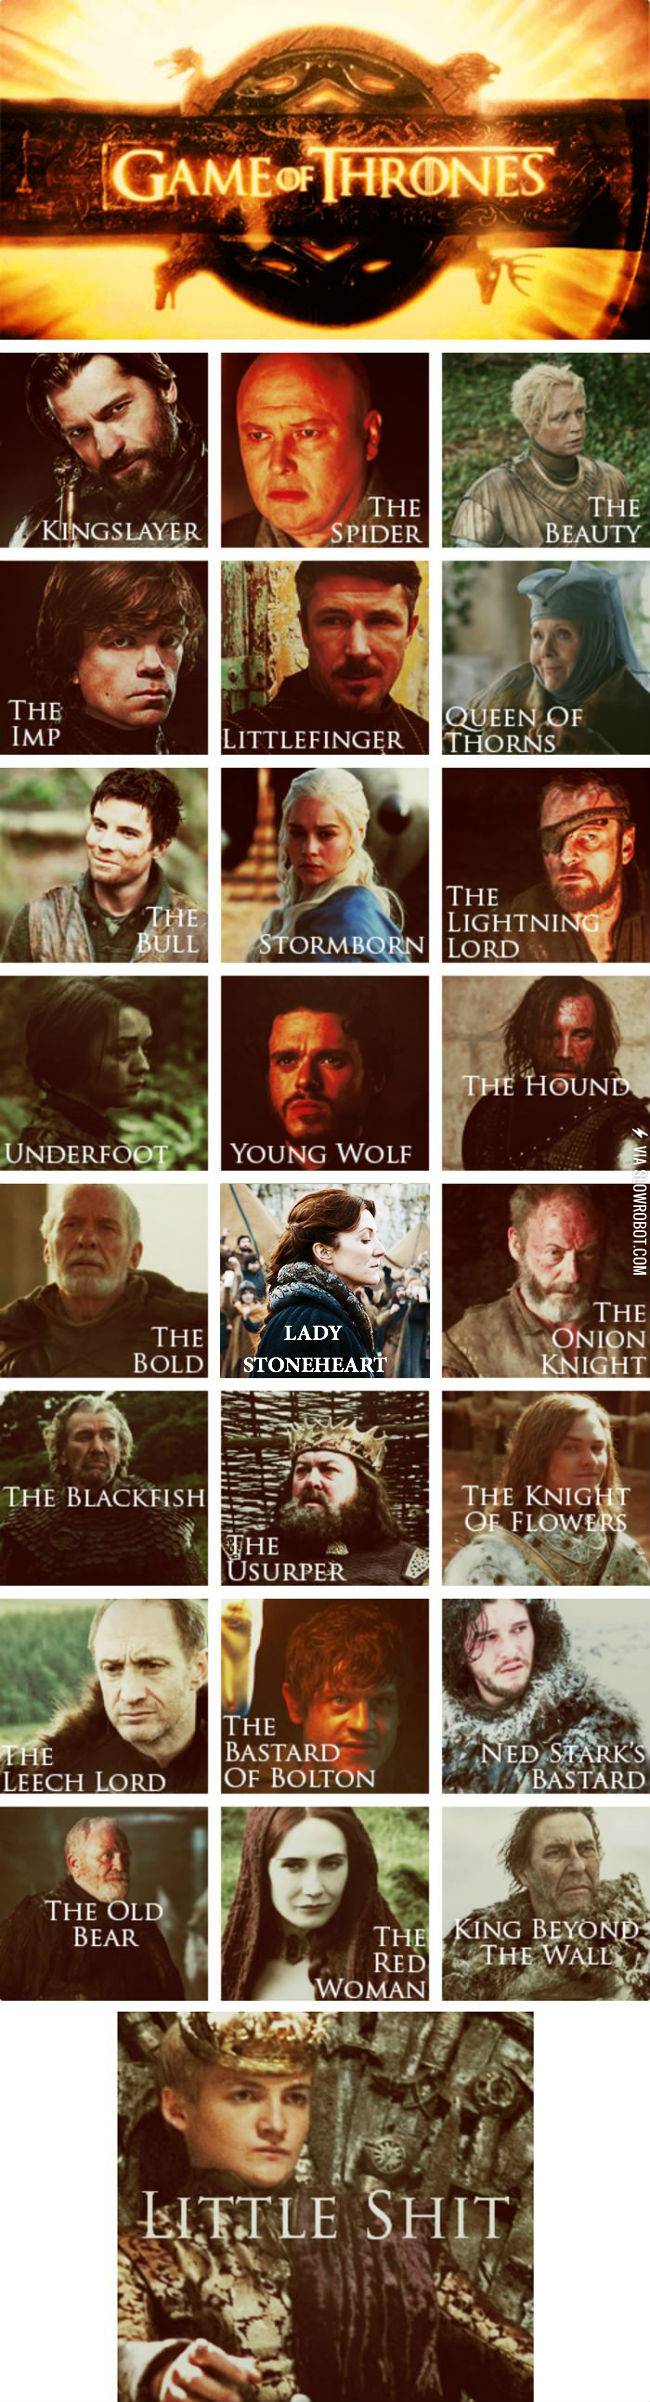 Nicknames+for+Game+of+Throne+characters.